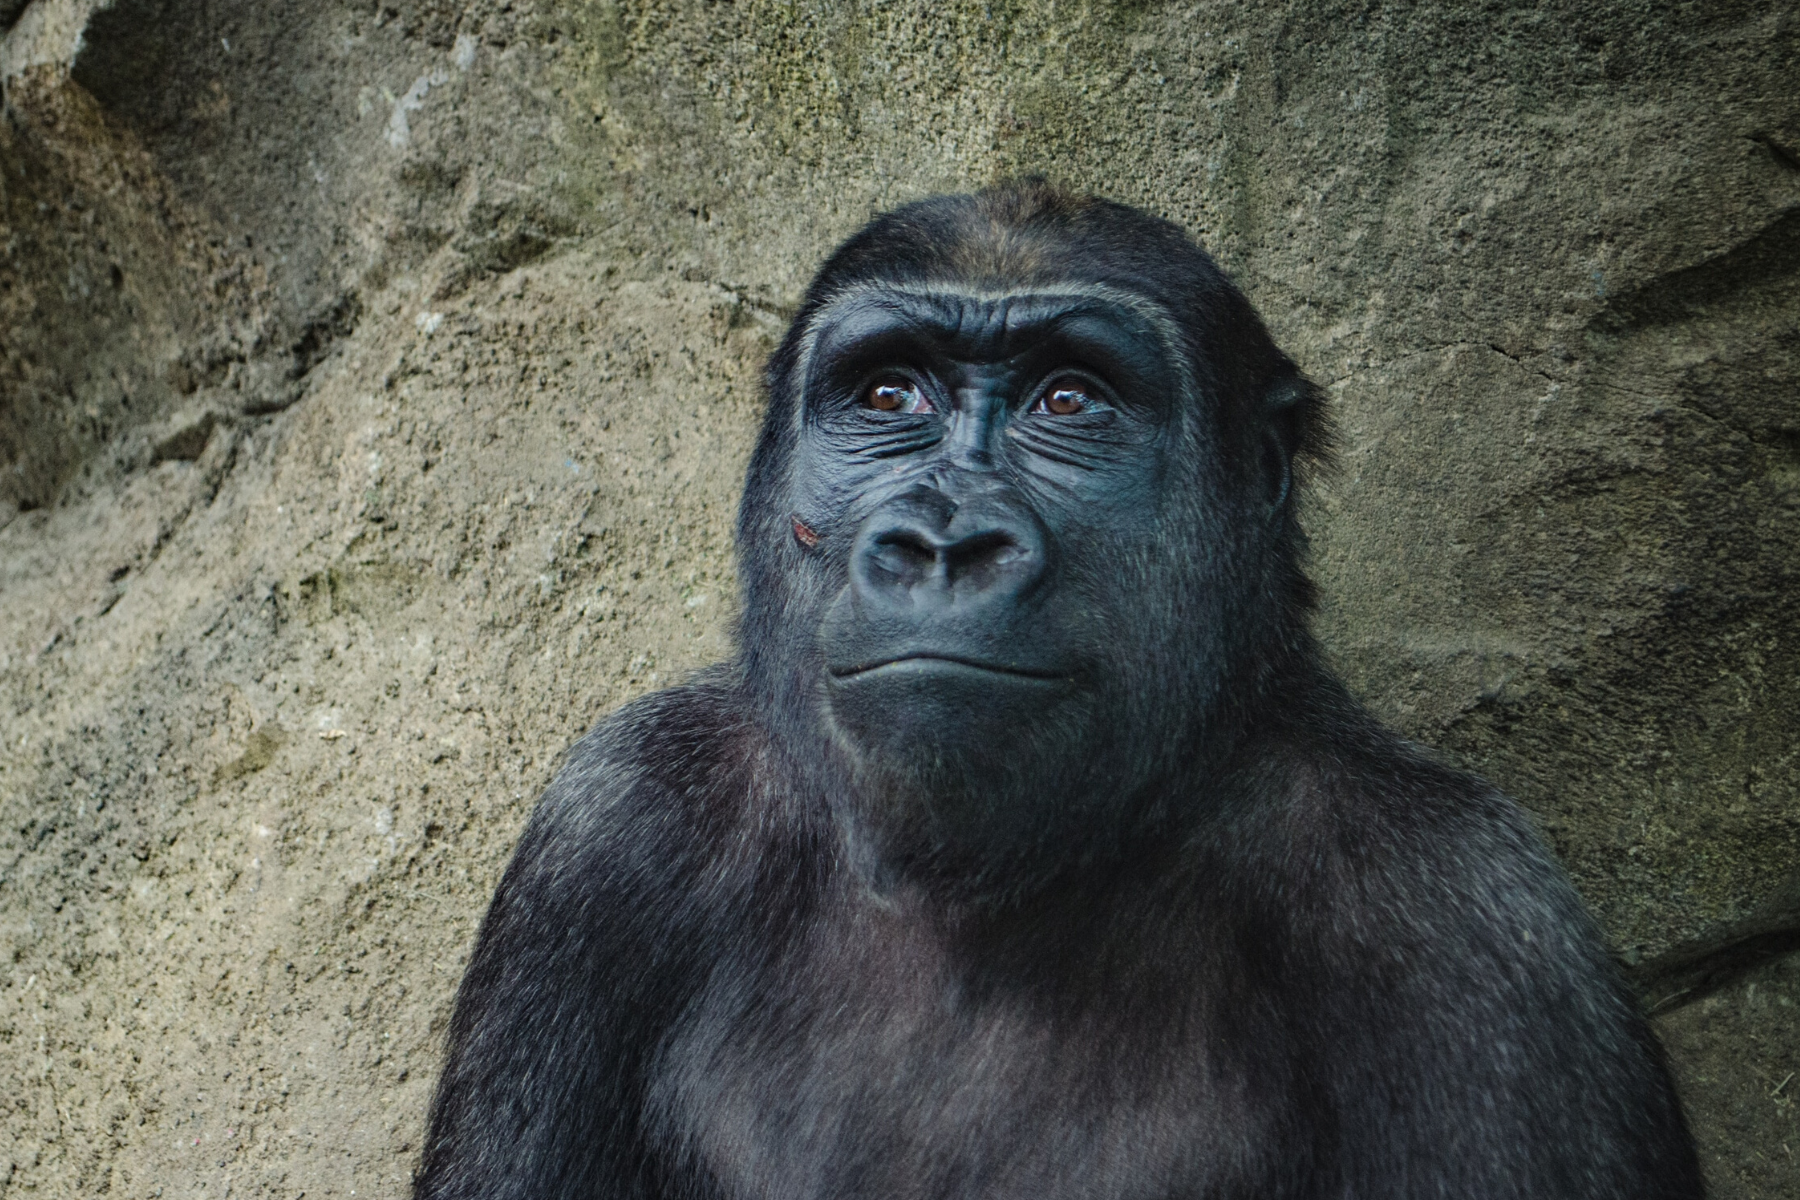 Black gorilla sitting in front of rock smiling and looking up